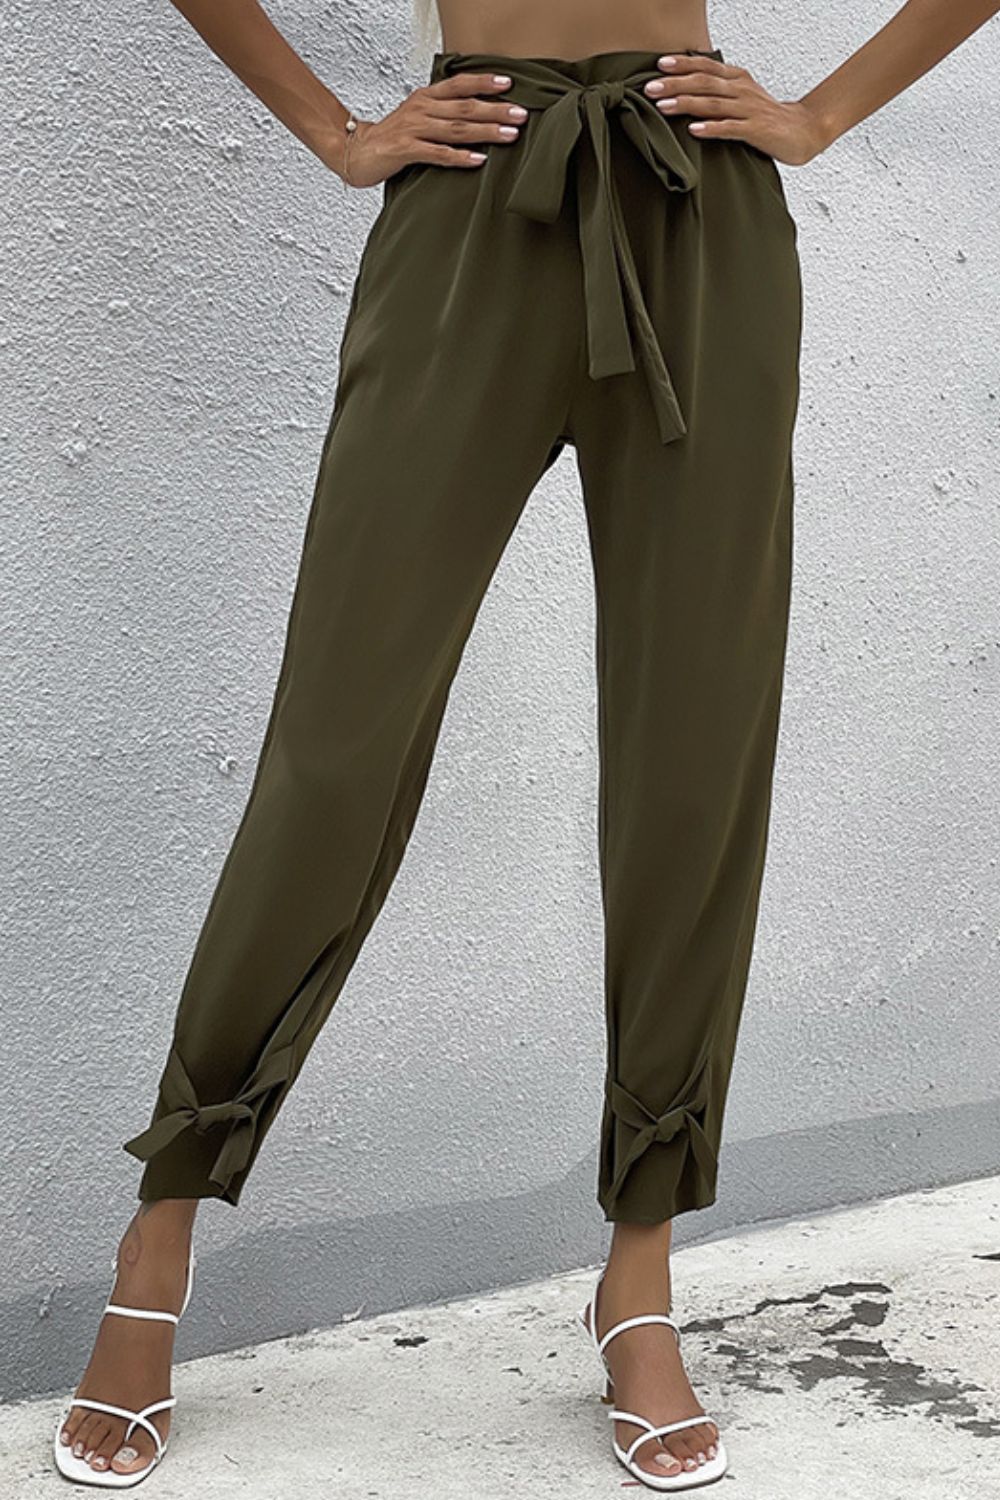 Tie Detail Belted Pants with Pockets - Green / S - Bottoms - Pants - 1 - 2024